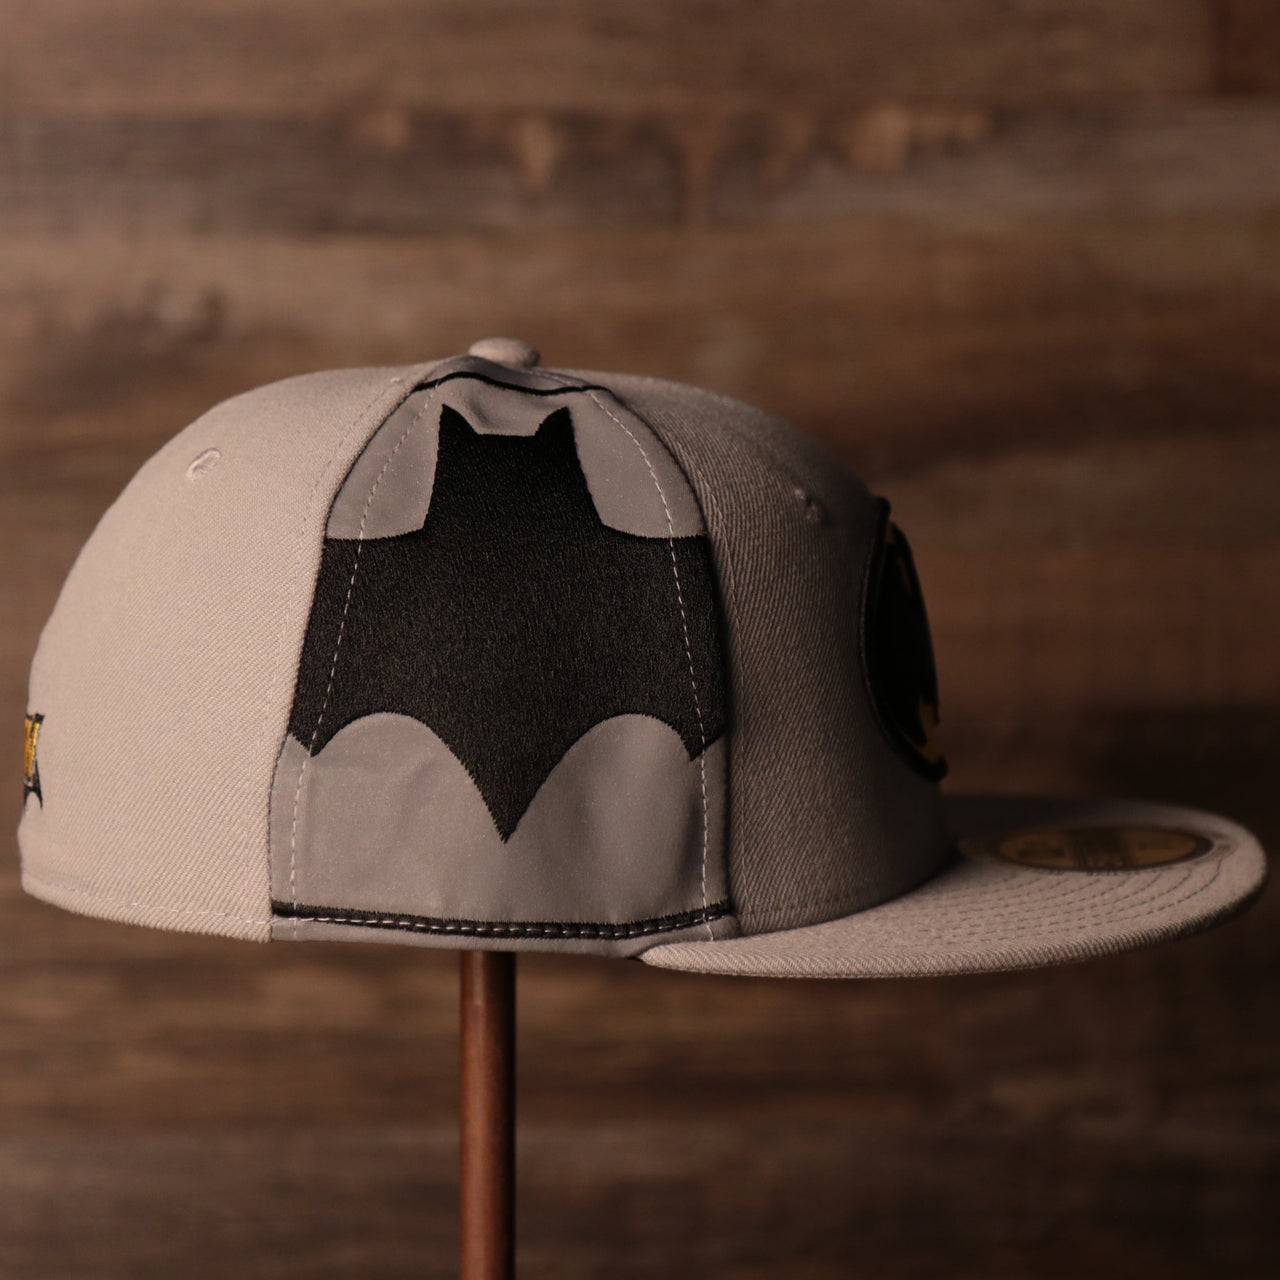 the wearers right side has a reflective panel with the batman logo enlarged on it Batman Grey Bottom Fitted Cap | Batman Superhero Gray Bottom Fitted Hat